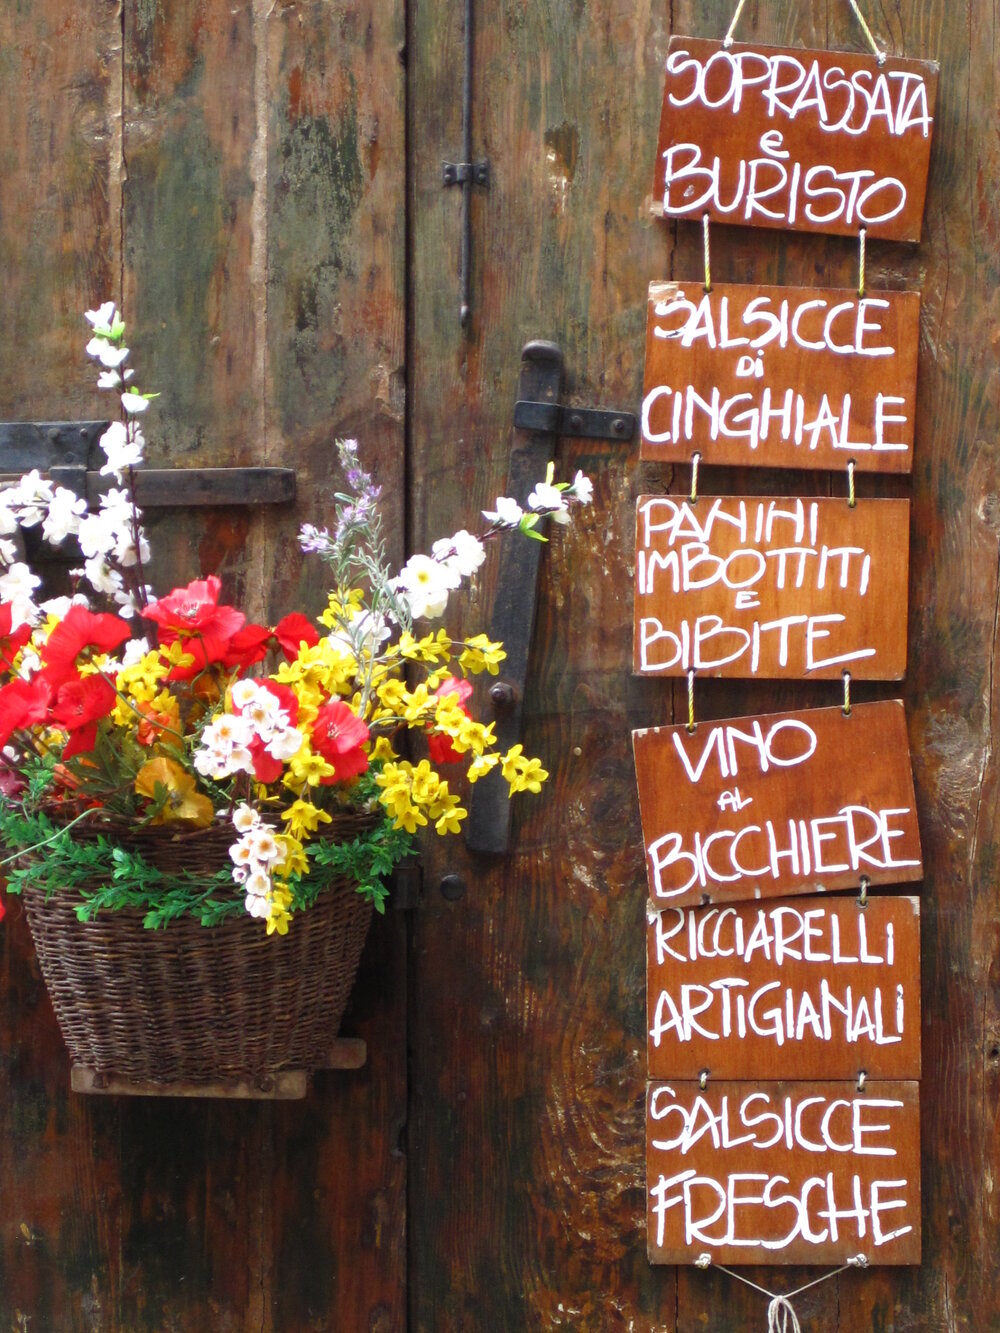 Shop signs in Arezzo, Italy